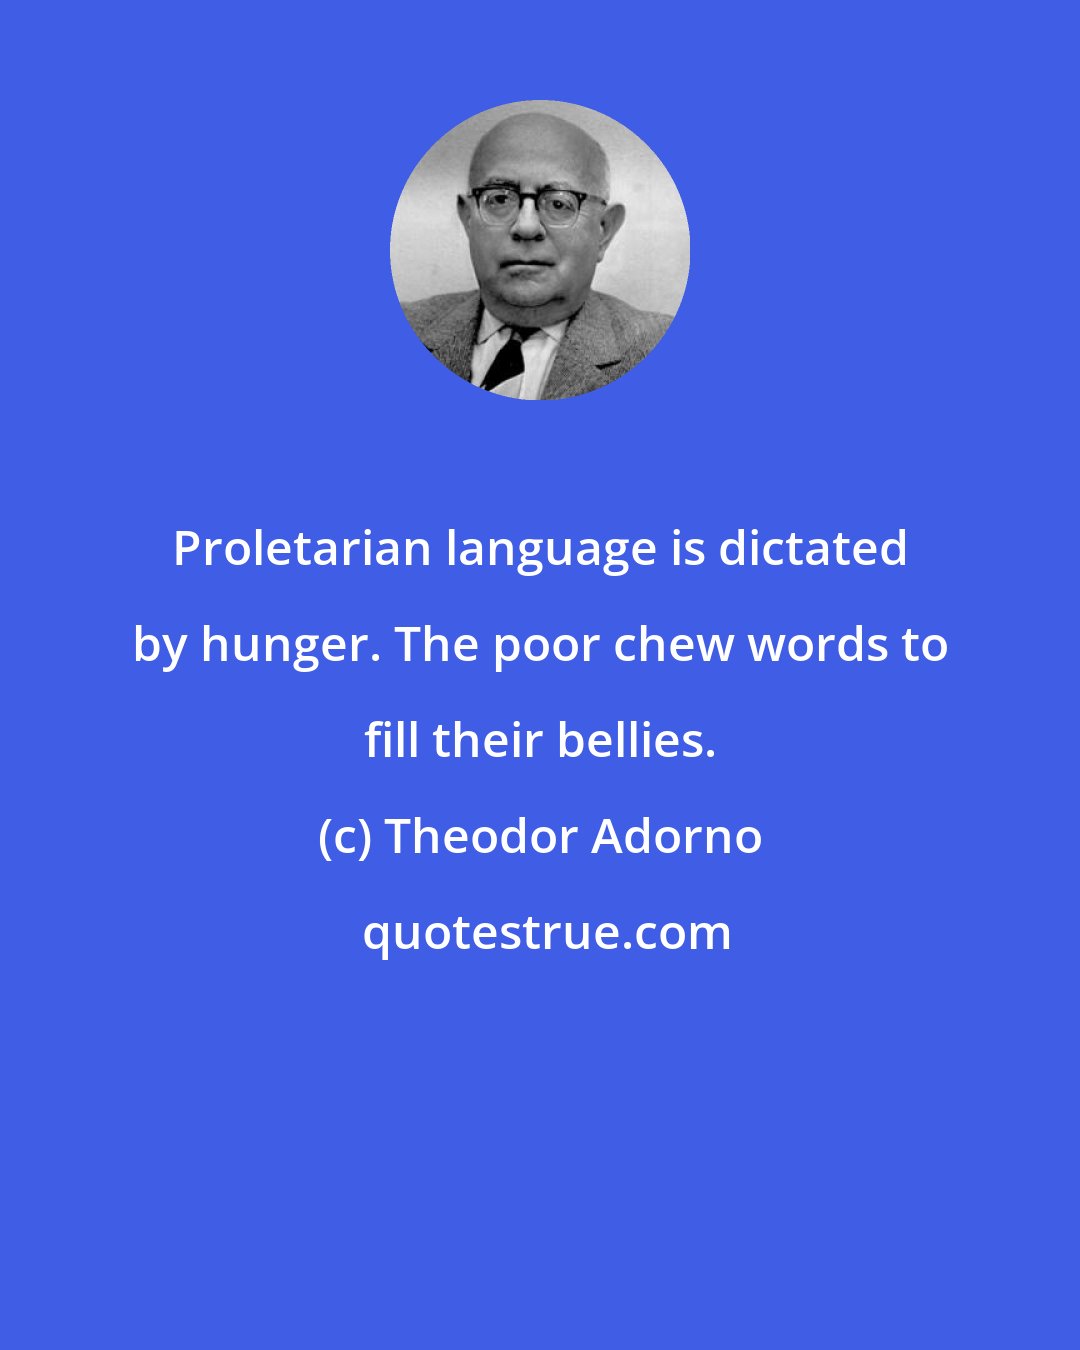 Theodor Adorno: Proletarian language is dictated by hunger. The poor chew words to fill their bellies.